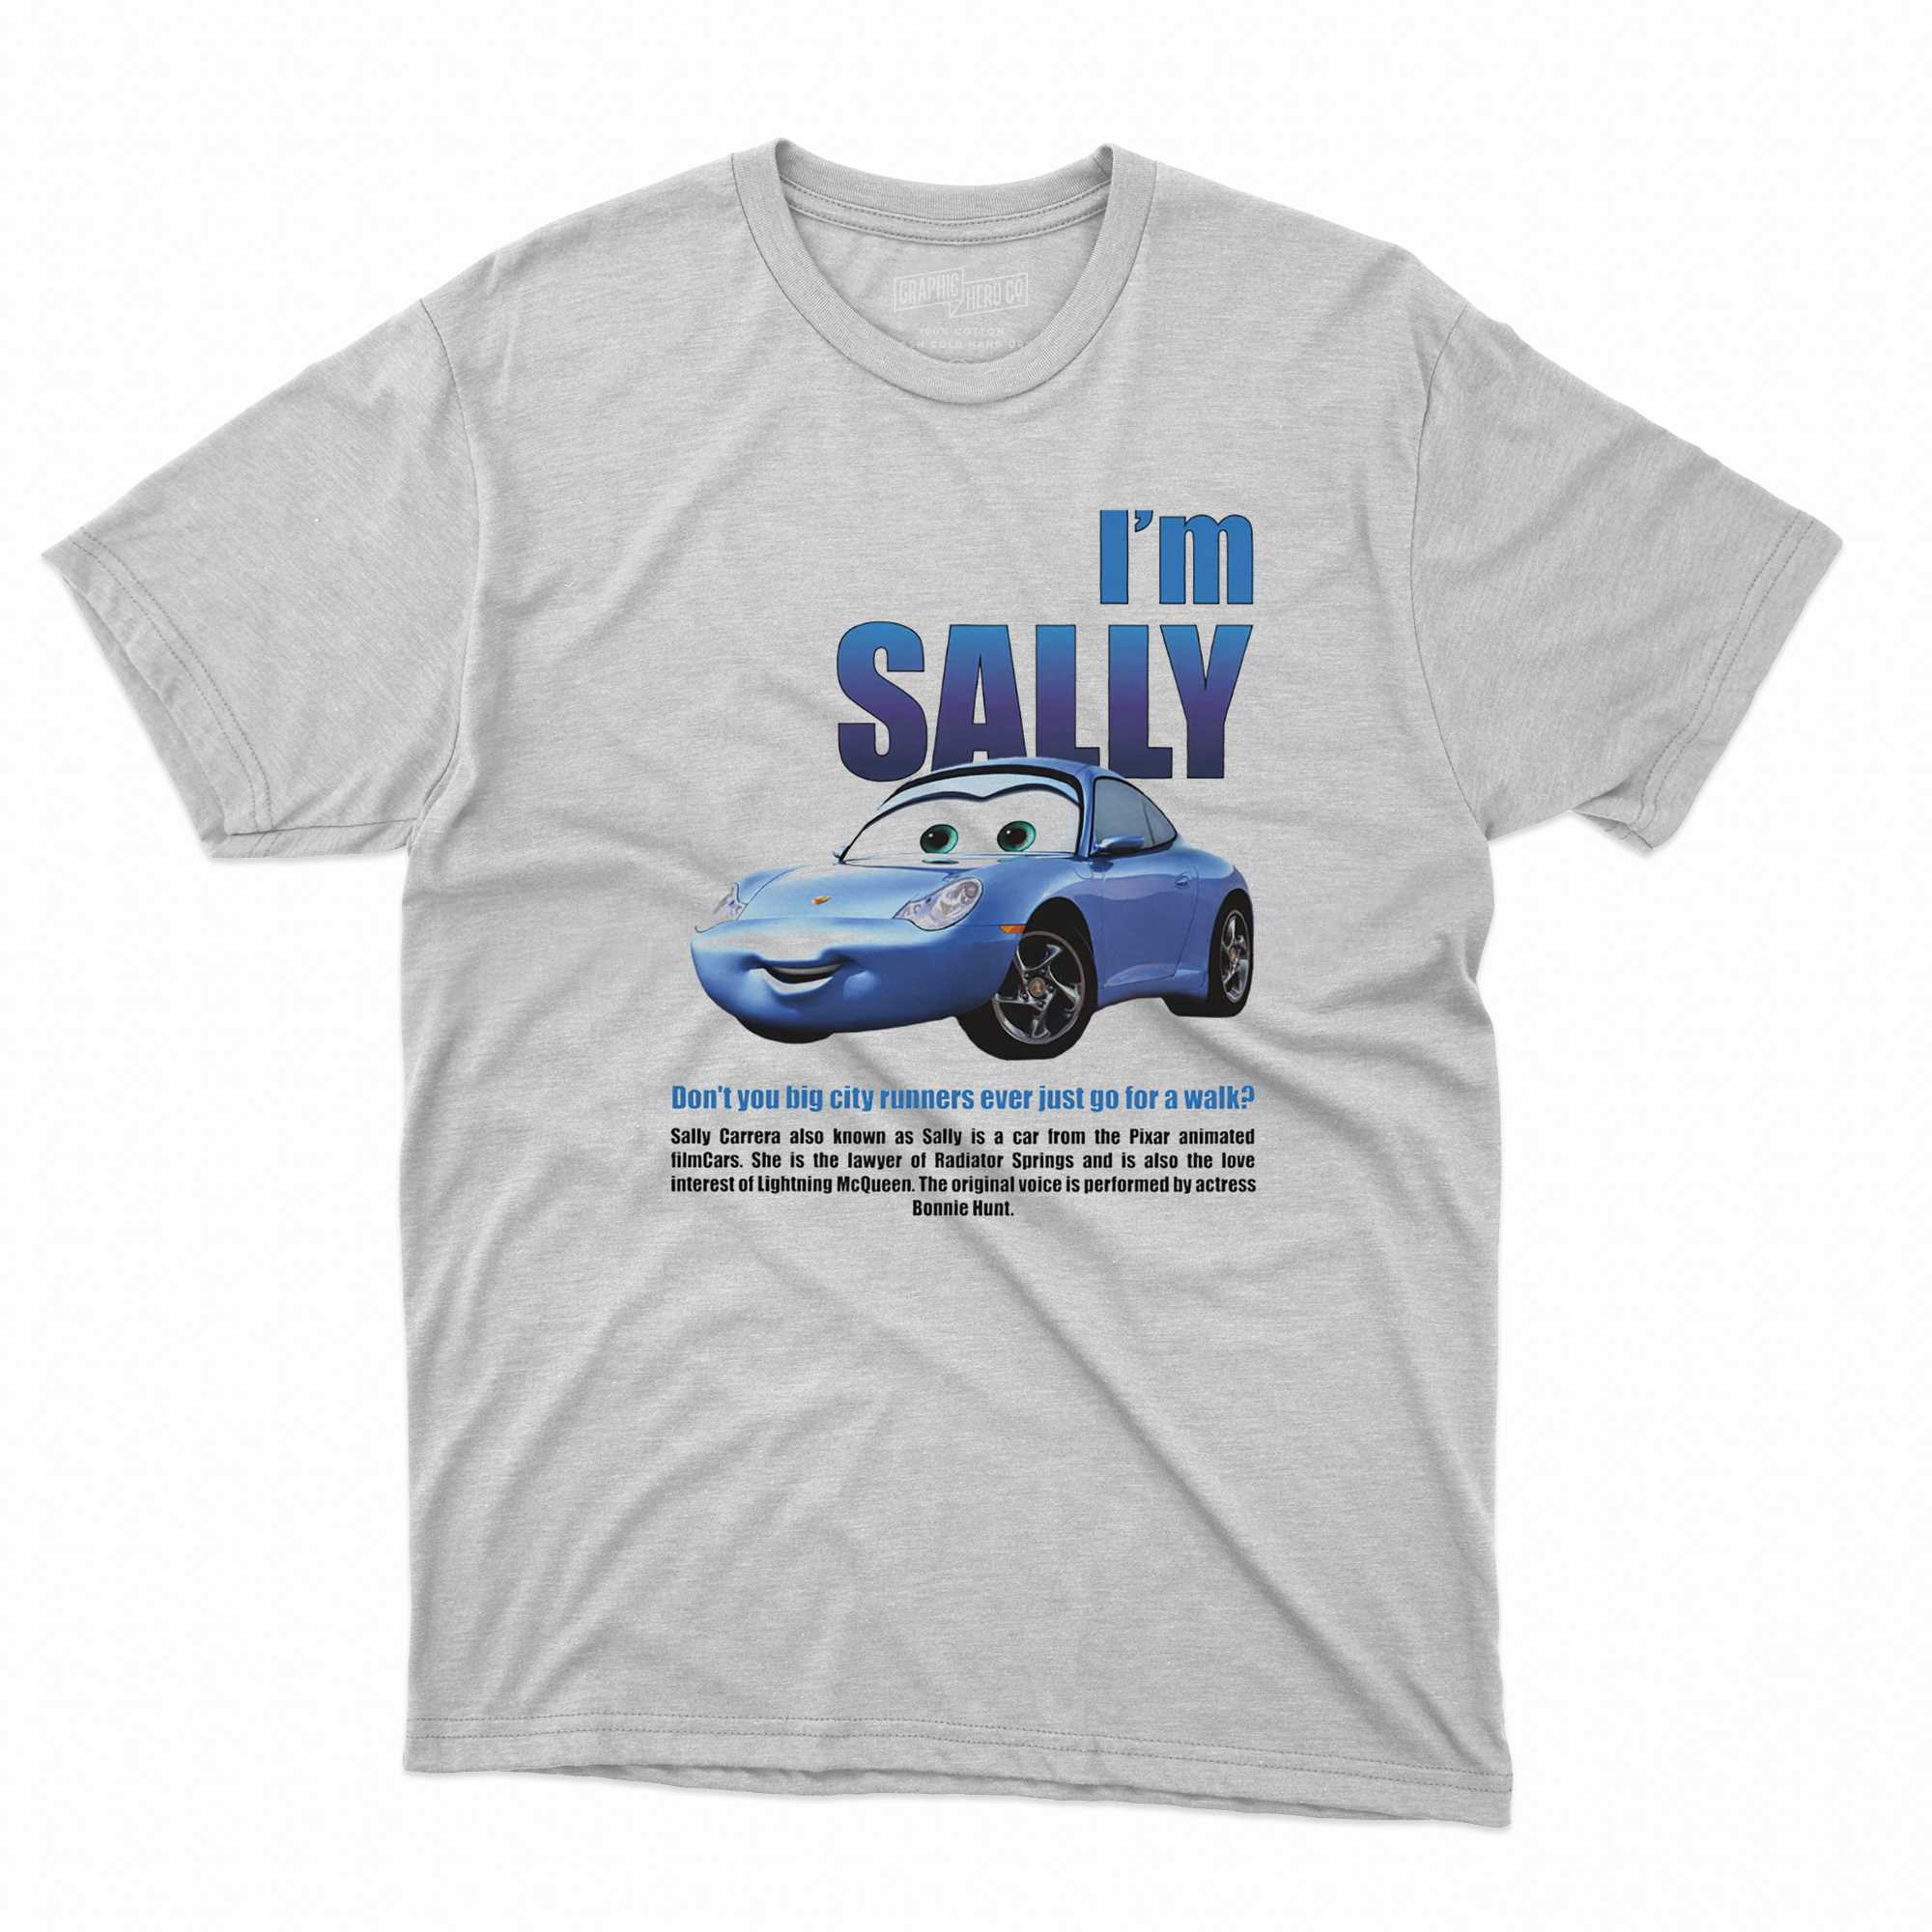 I'm Sally Don't You Big City Runners Ever Just Go For A Walk Shirt